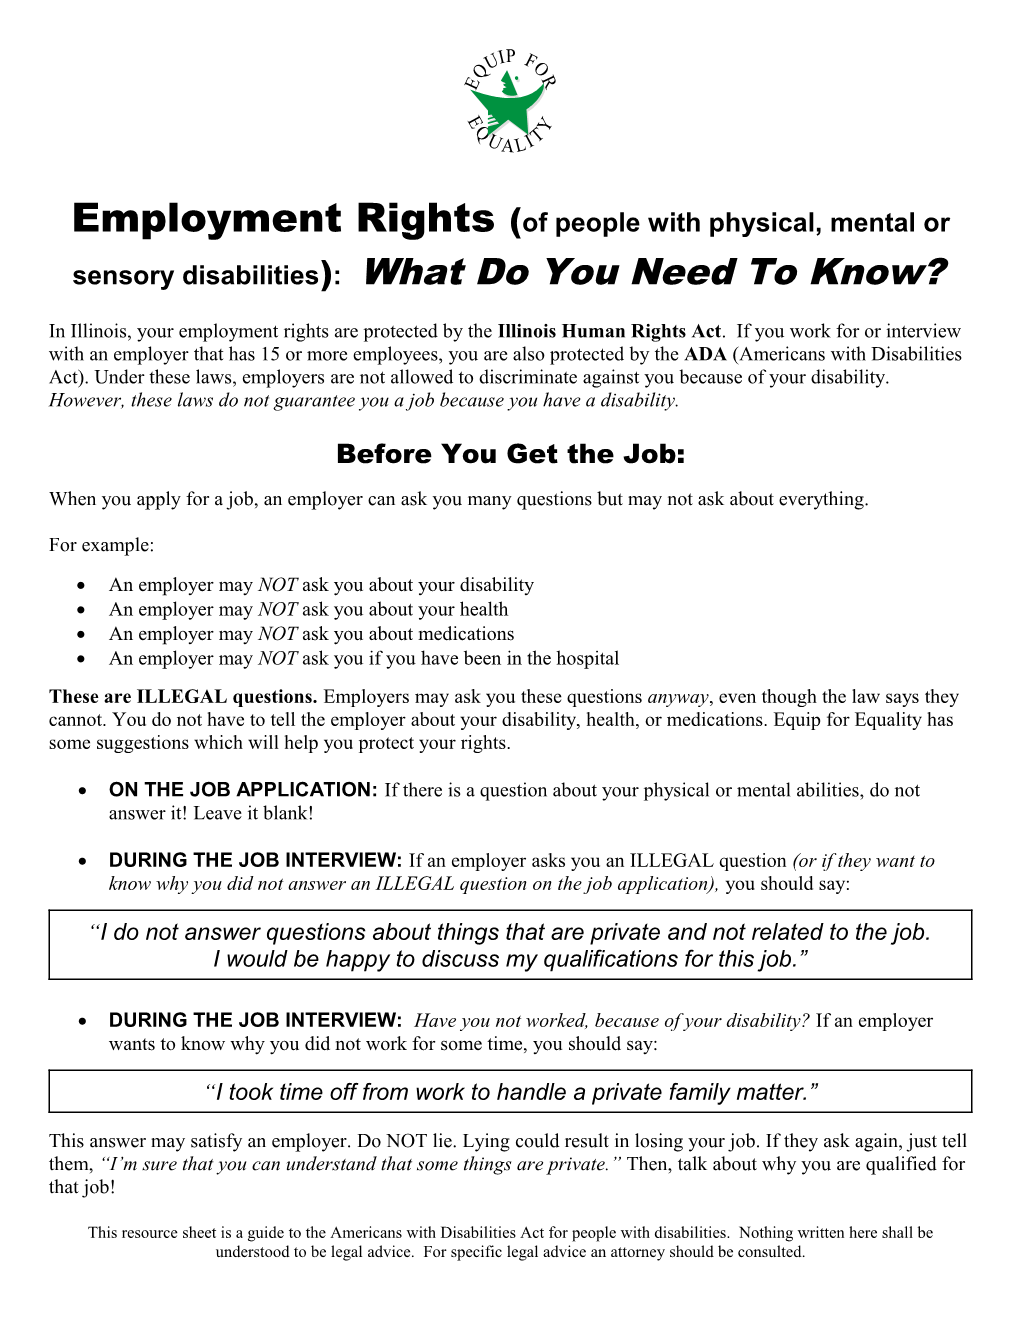 Employment Rights: What Do People with Physical Or Mental Disabilities Need to Know